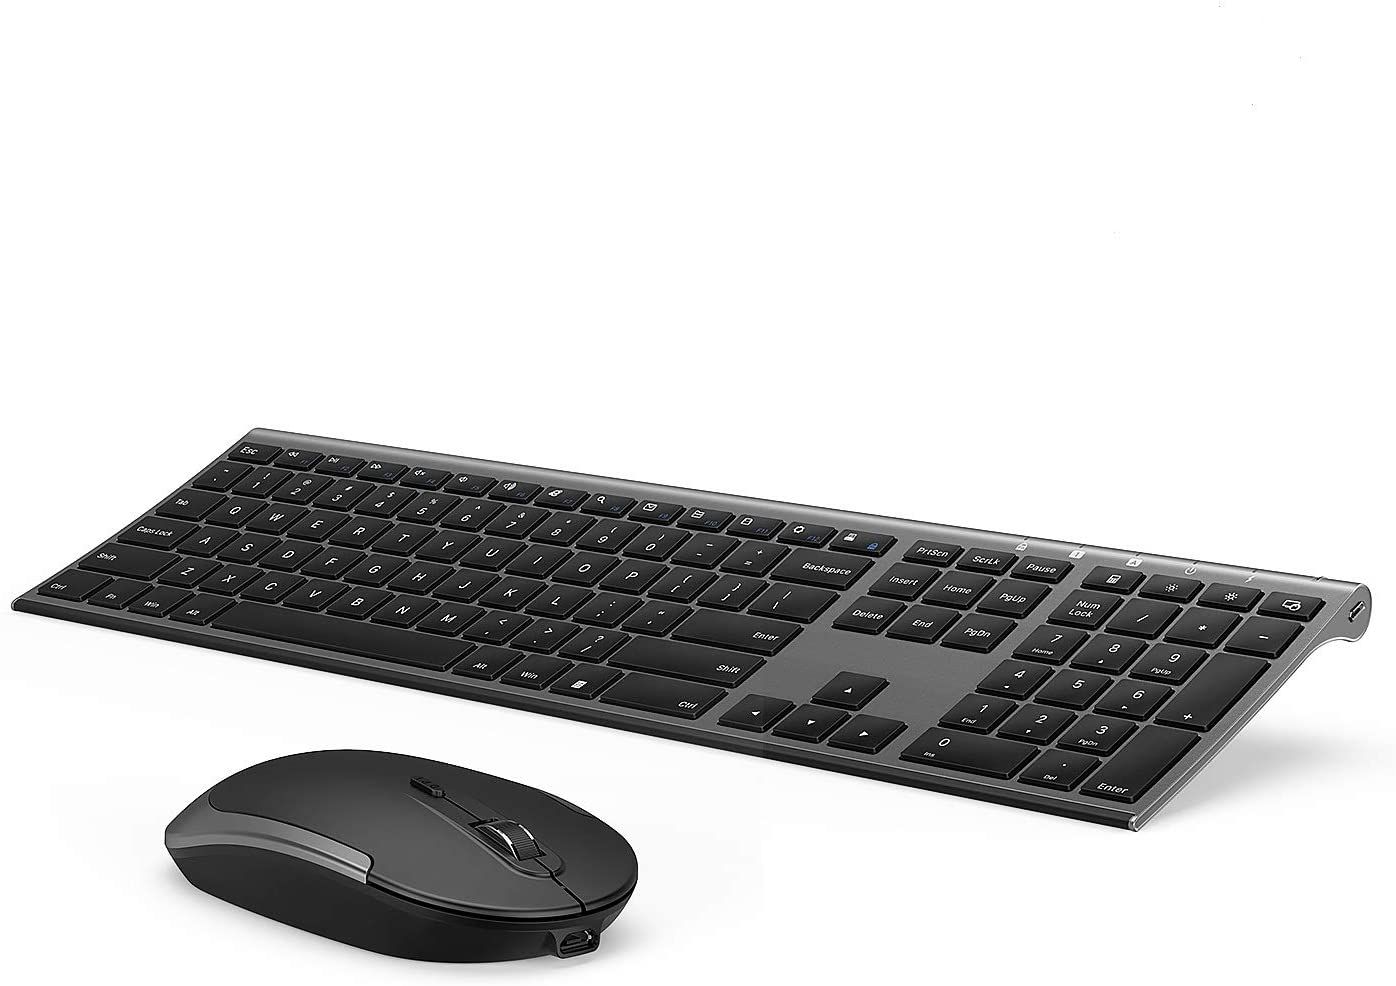 Vssoplor Wireless Keyboard and Mouse